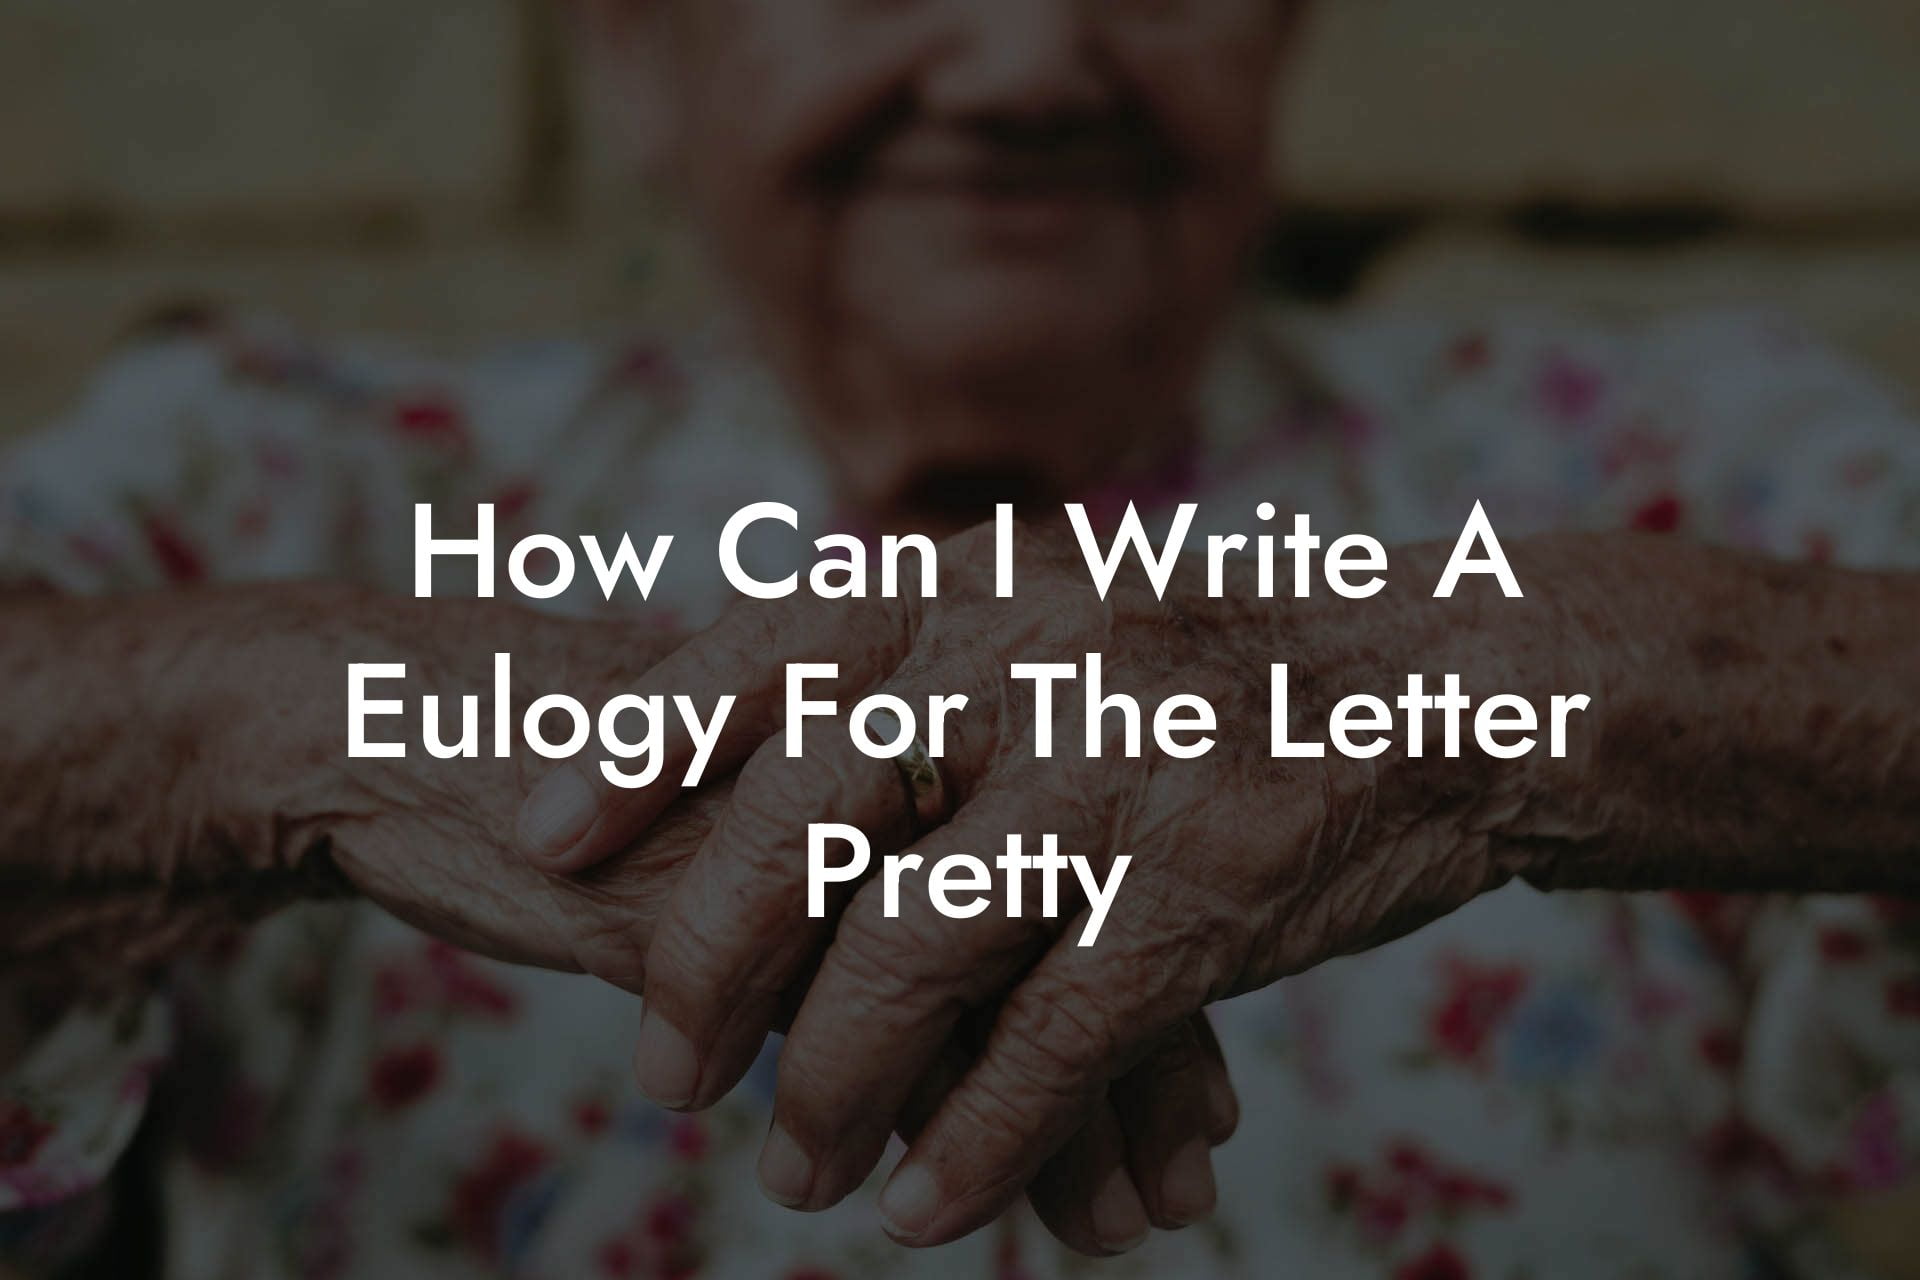 How Can I Write A Eulogy For The Letter Pretty